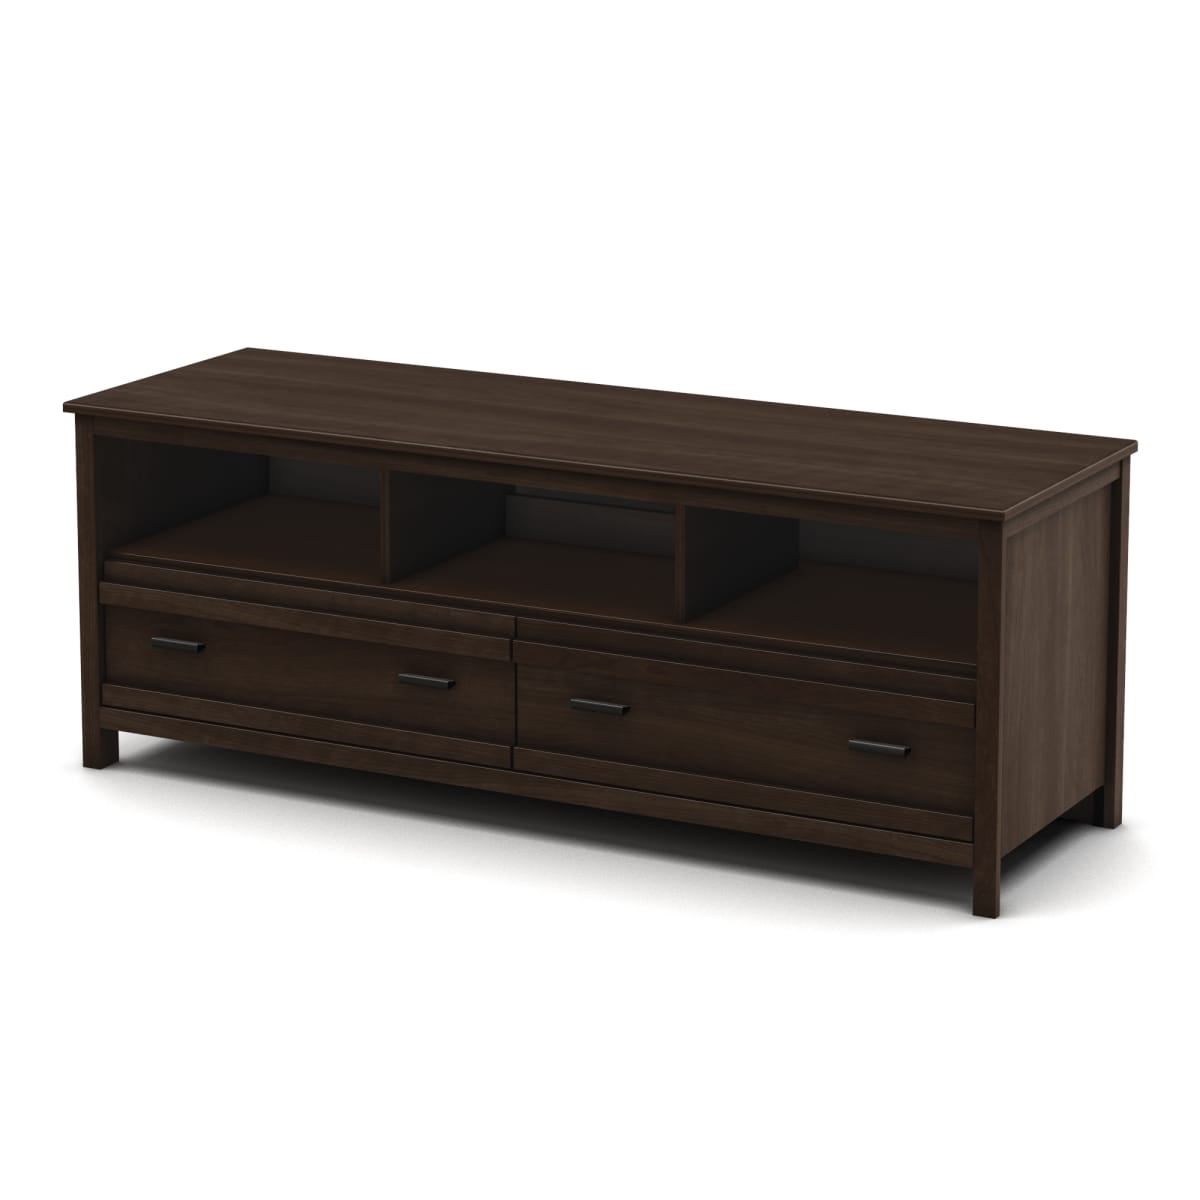 TV Stand for TVs up to 65", Chocolate Color from South Shore Furniture $96 ($260 reg) Free Shipping